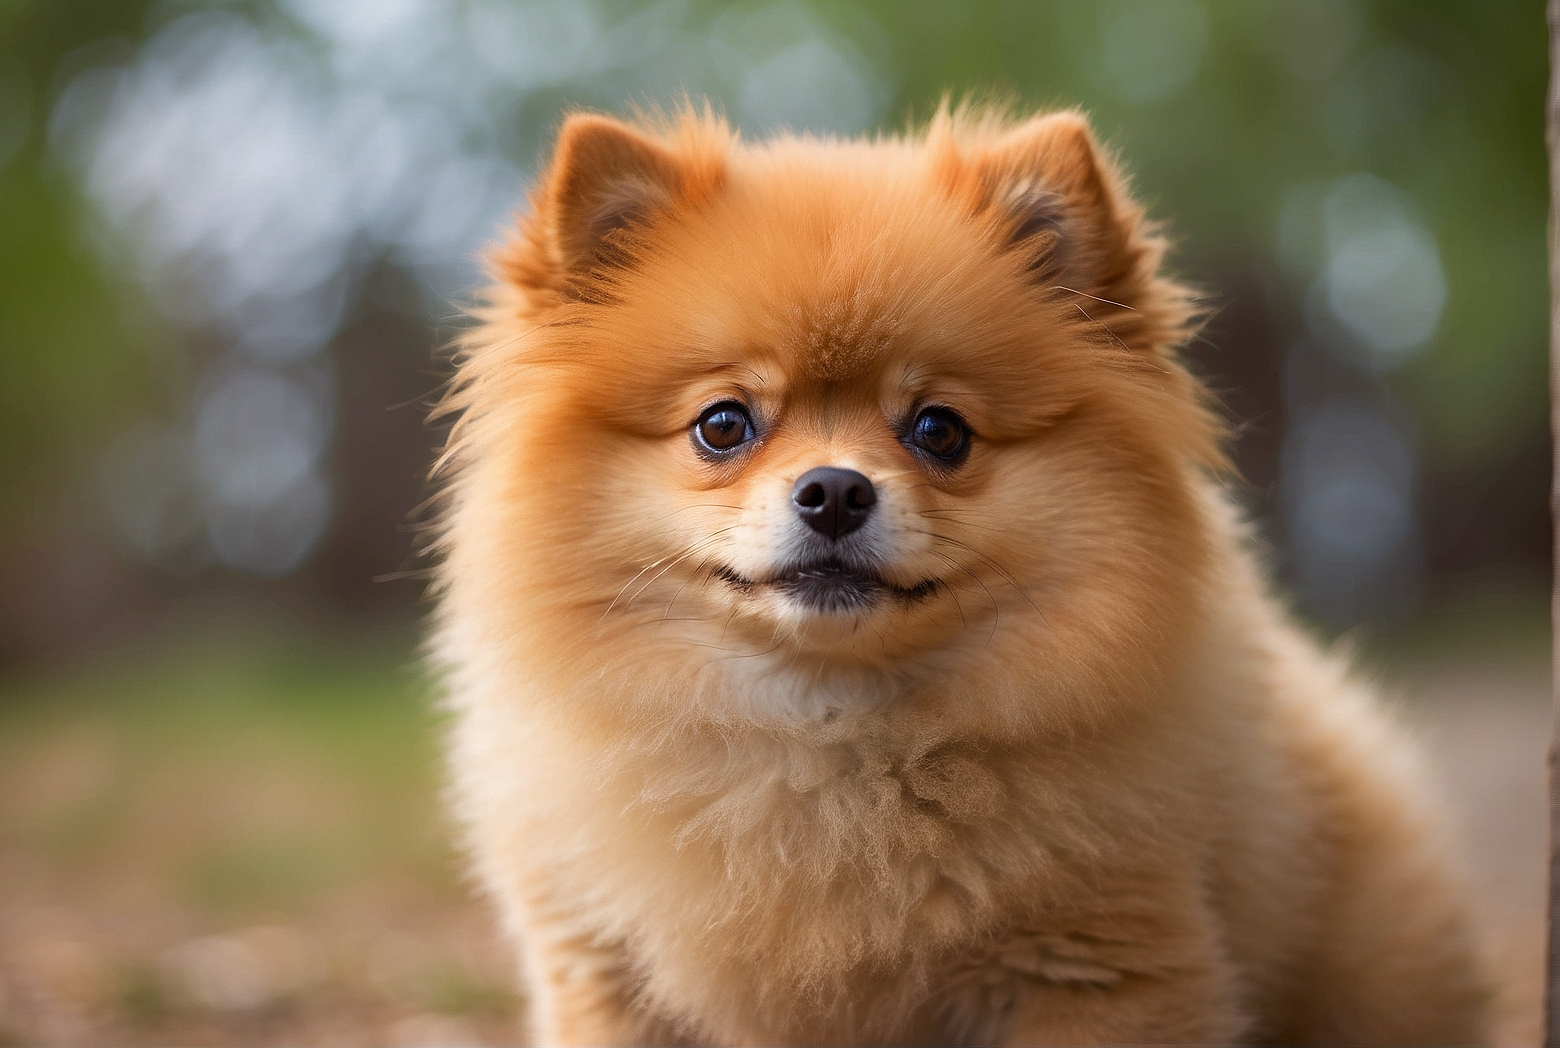 At what age do Pomeranians become protective?